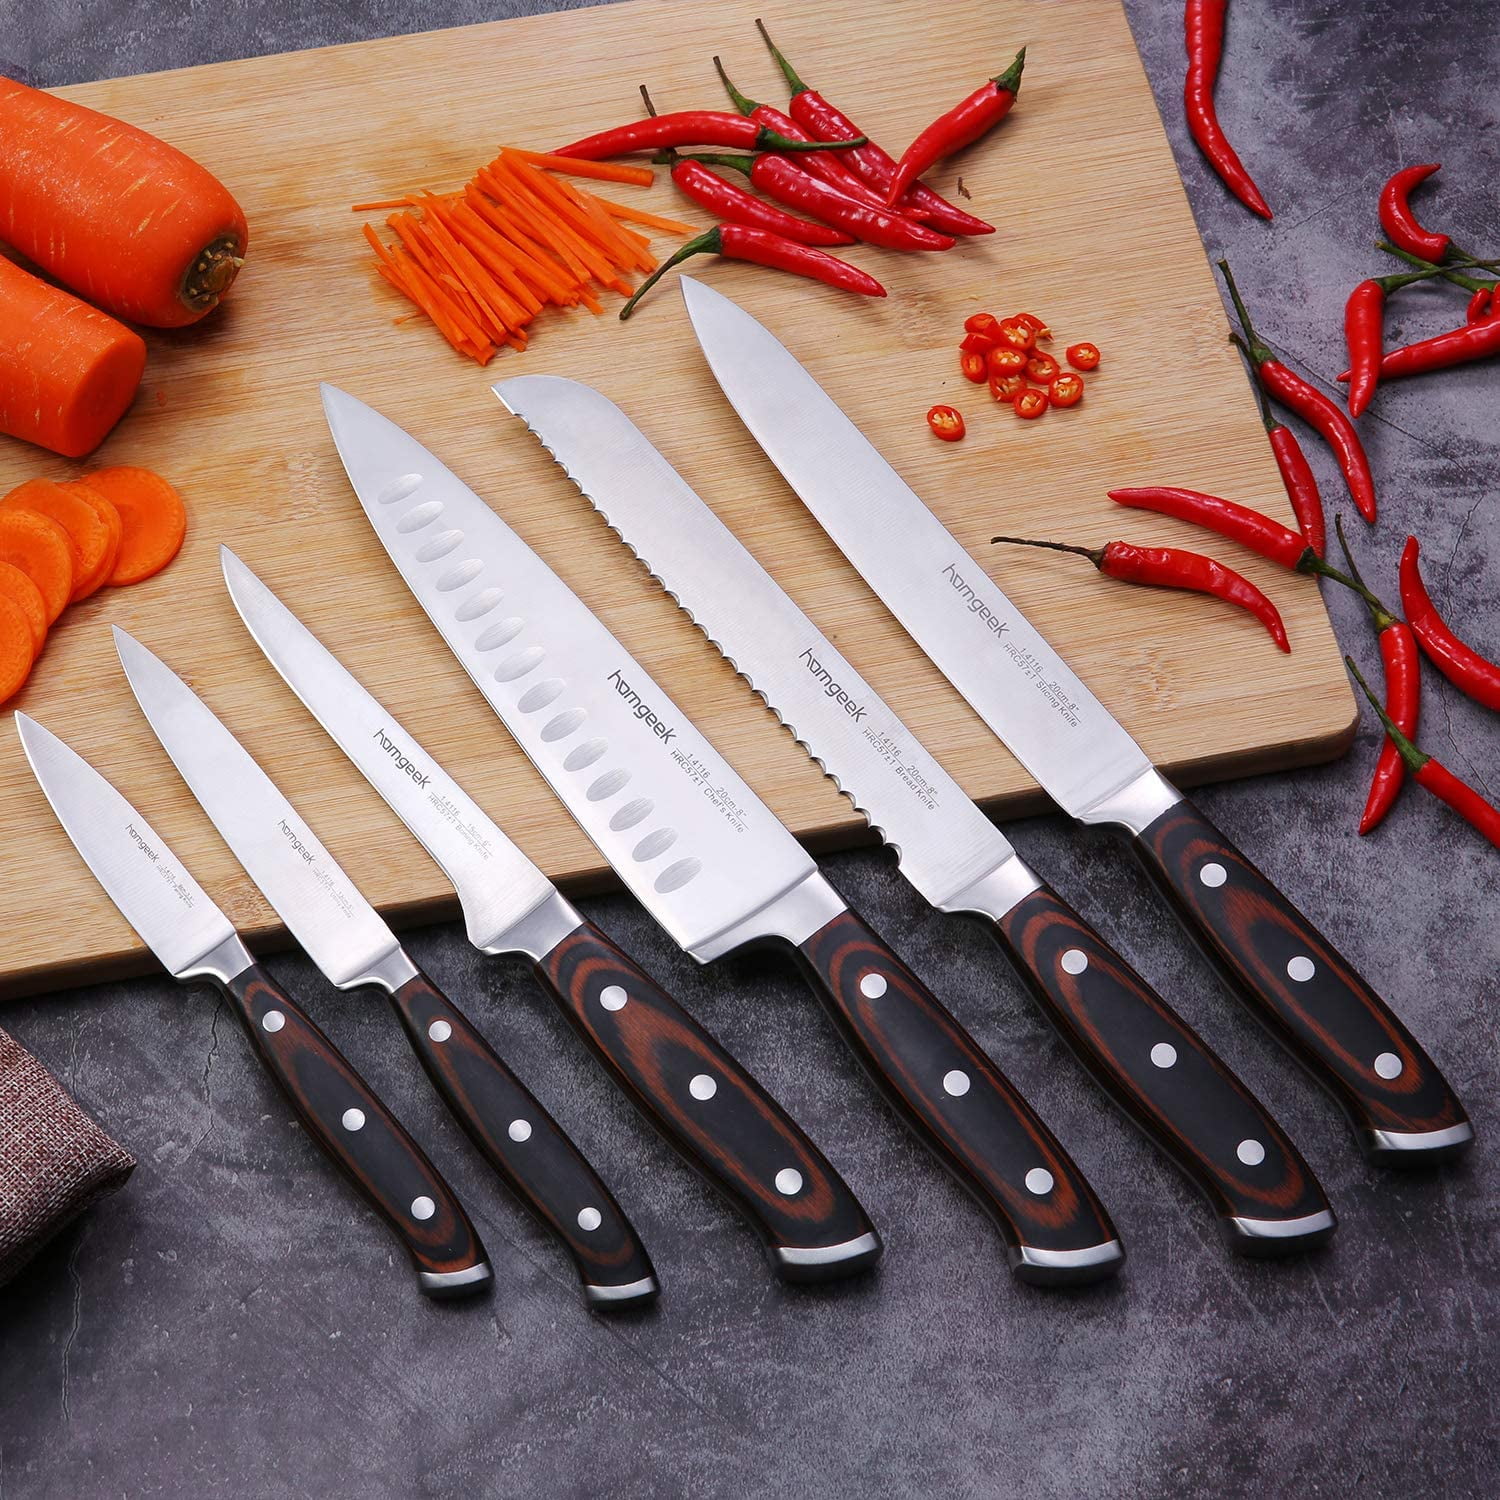 Homgeek Stainless Steel Serrated Knife Set | Kitchen knives Set With ...